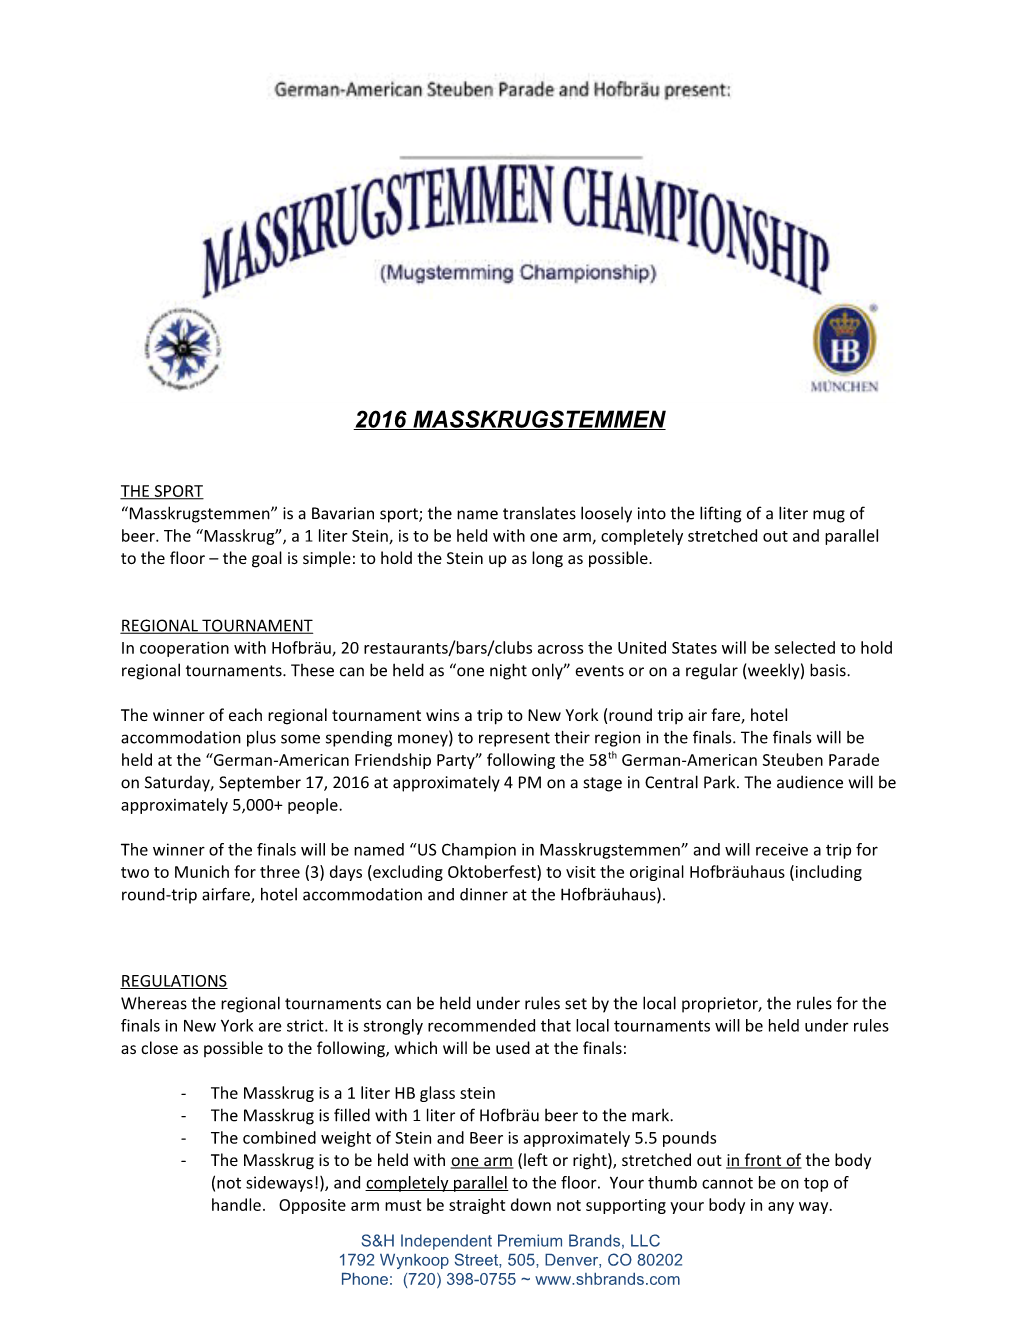 Masskrugstemmen Is a Bavarian Sport; the Name Translates Loosely Into the Lifting of A